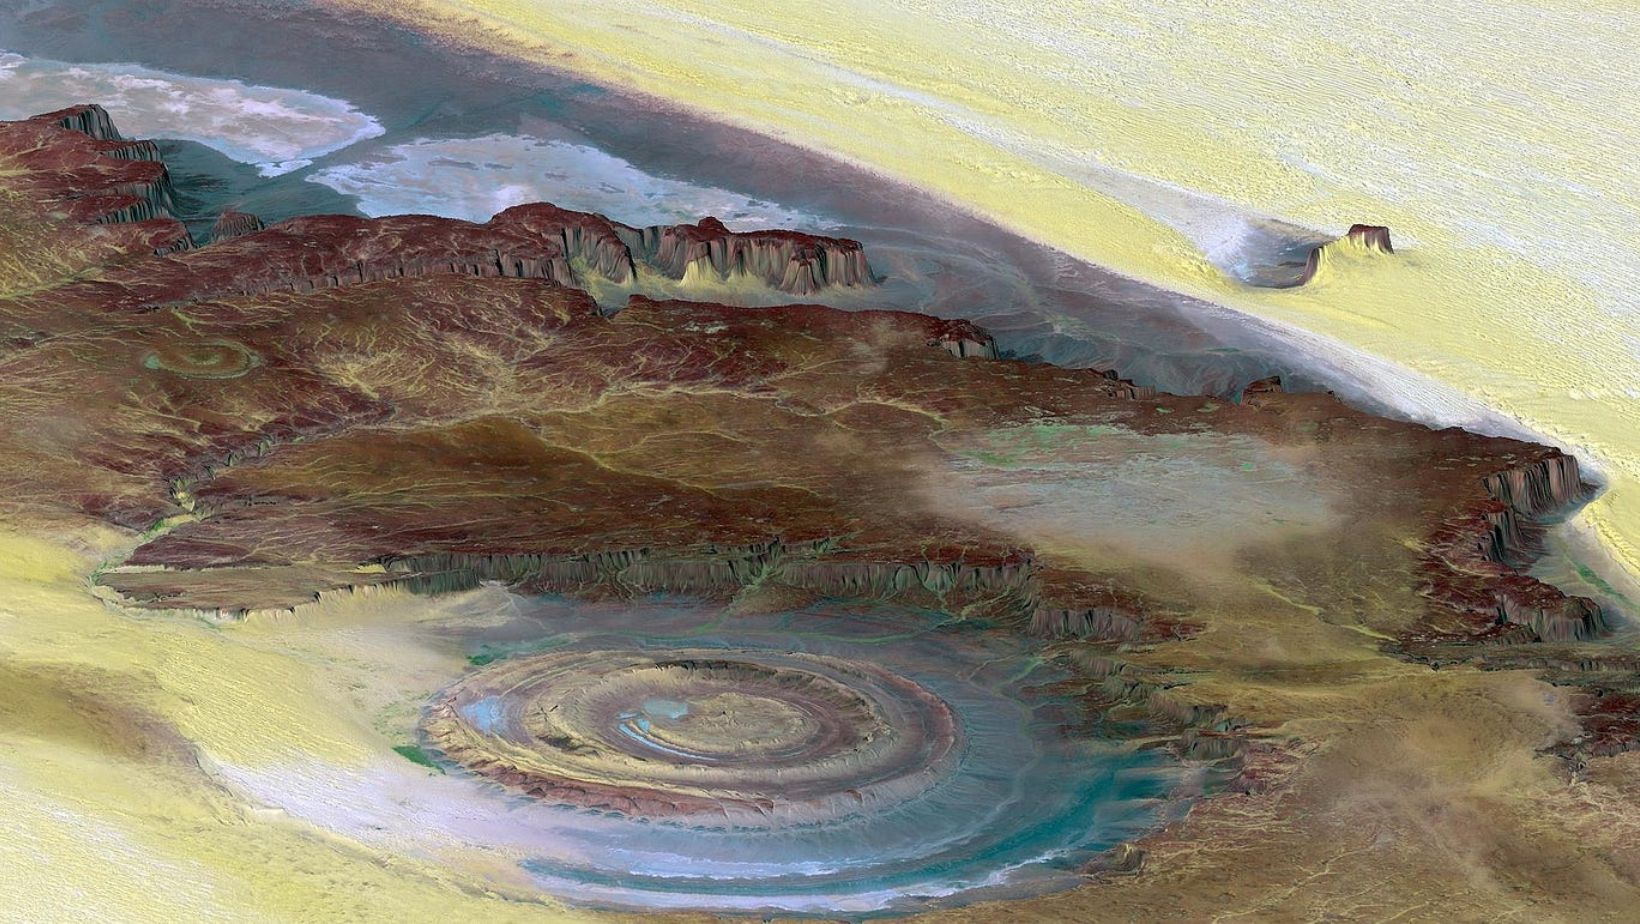 Eye of the Sahara: Unraveling the Mysteries of the Richat Structure